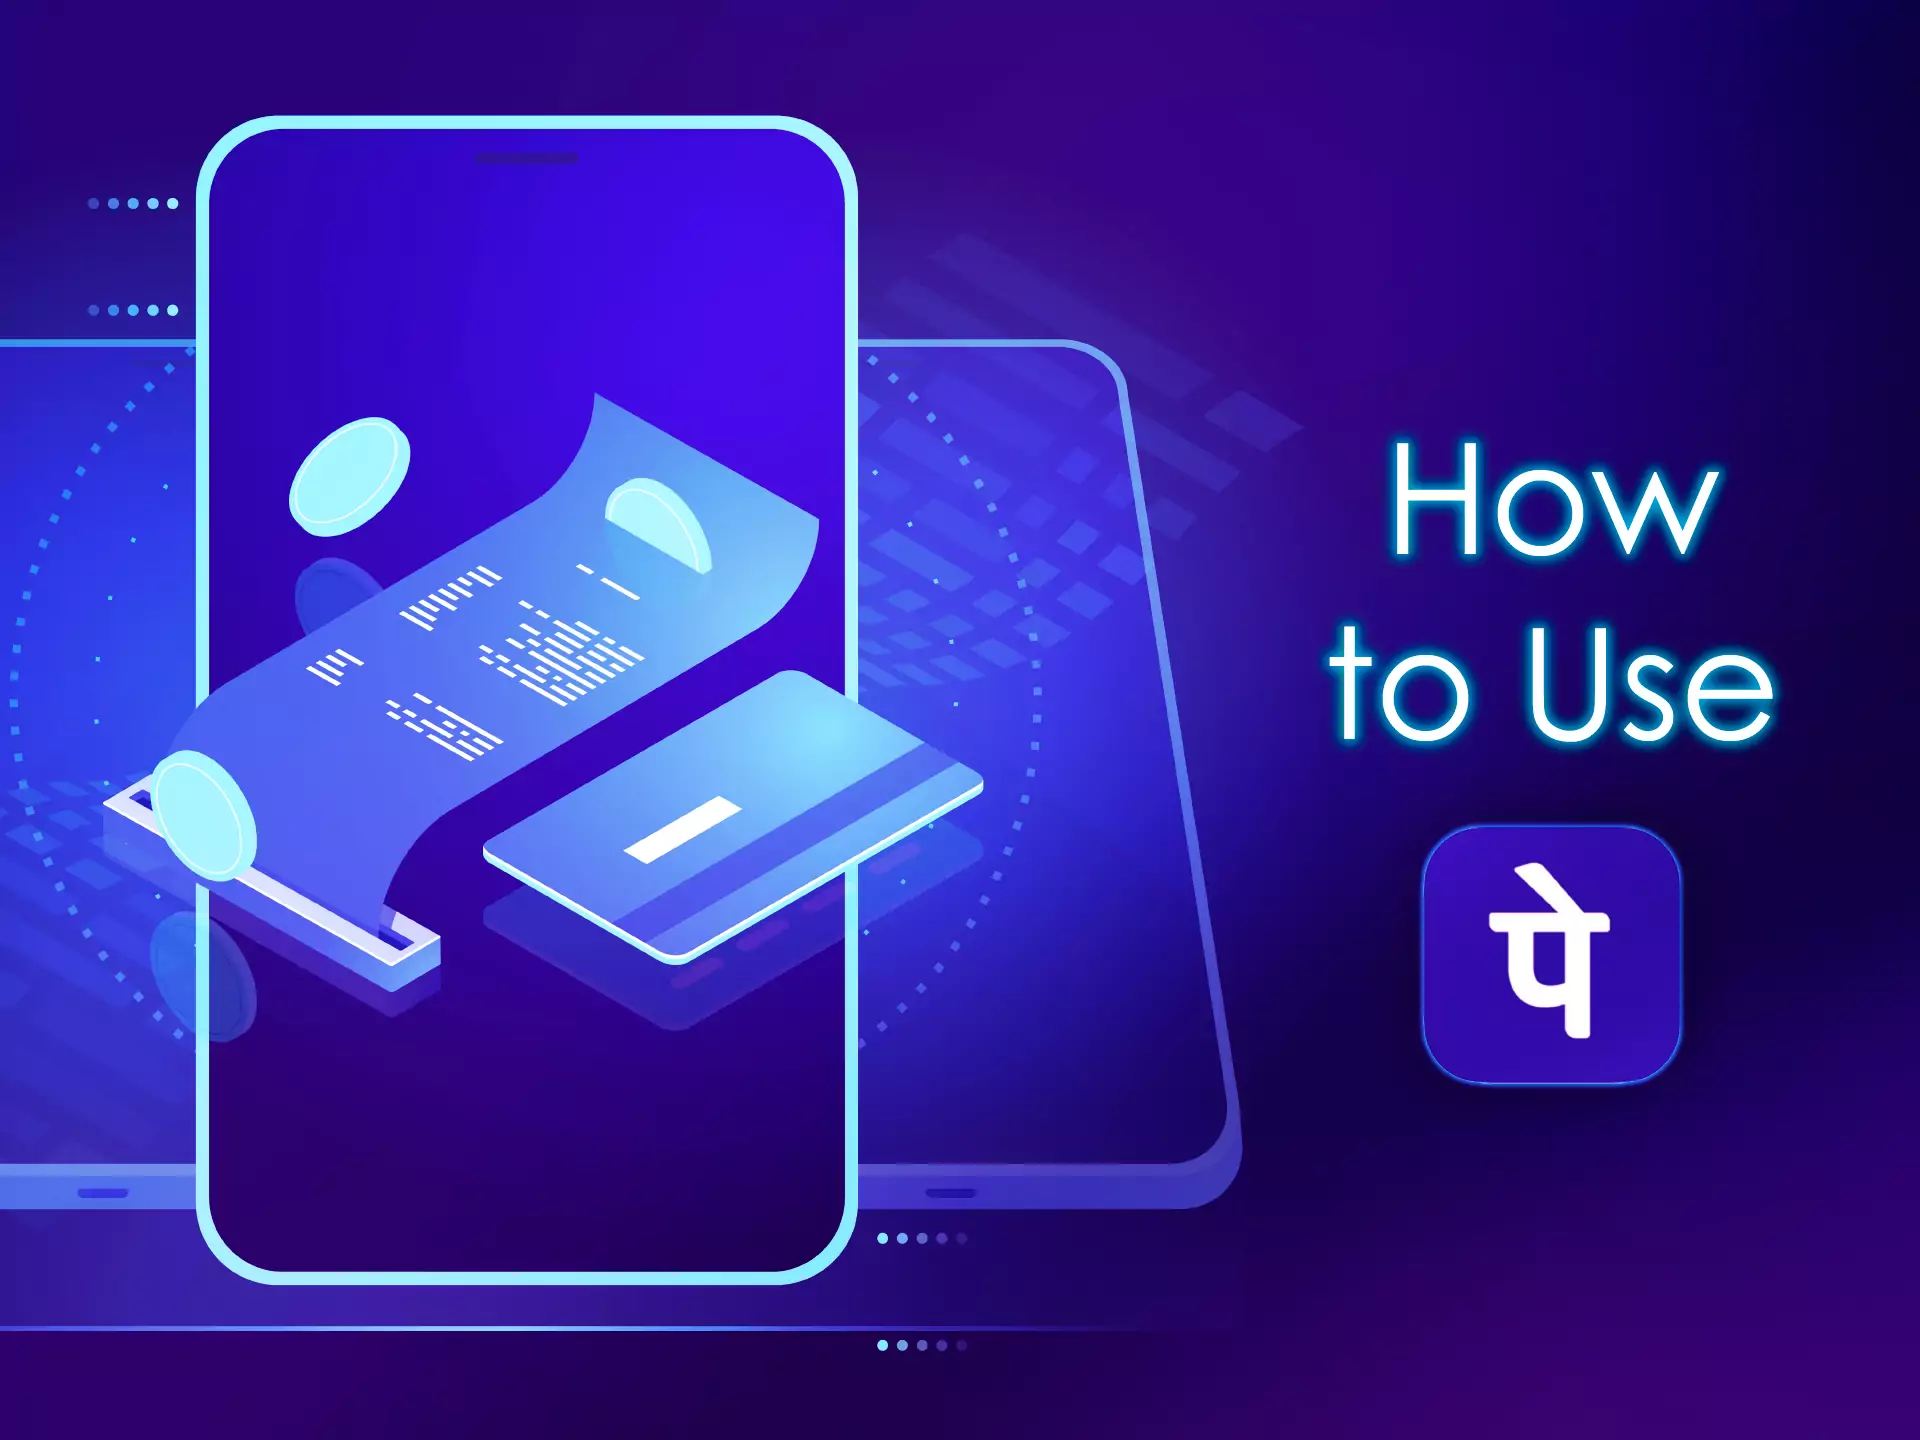 Download the PhonePe app, create an account and start depositing to your online casino.